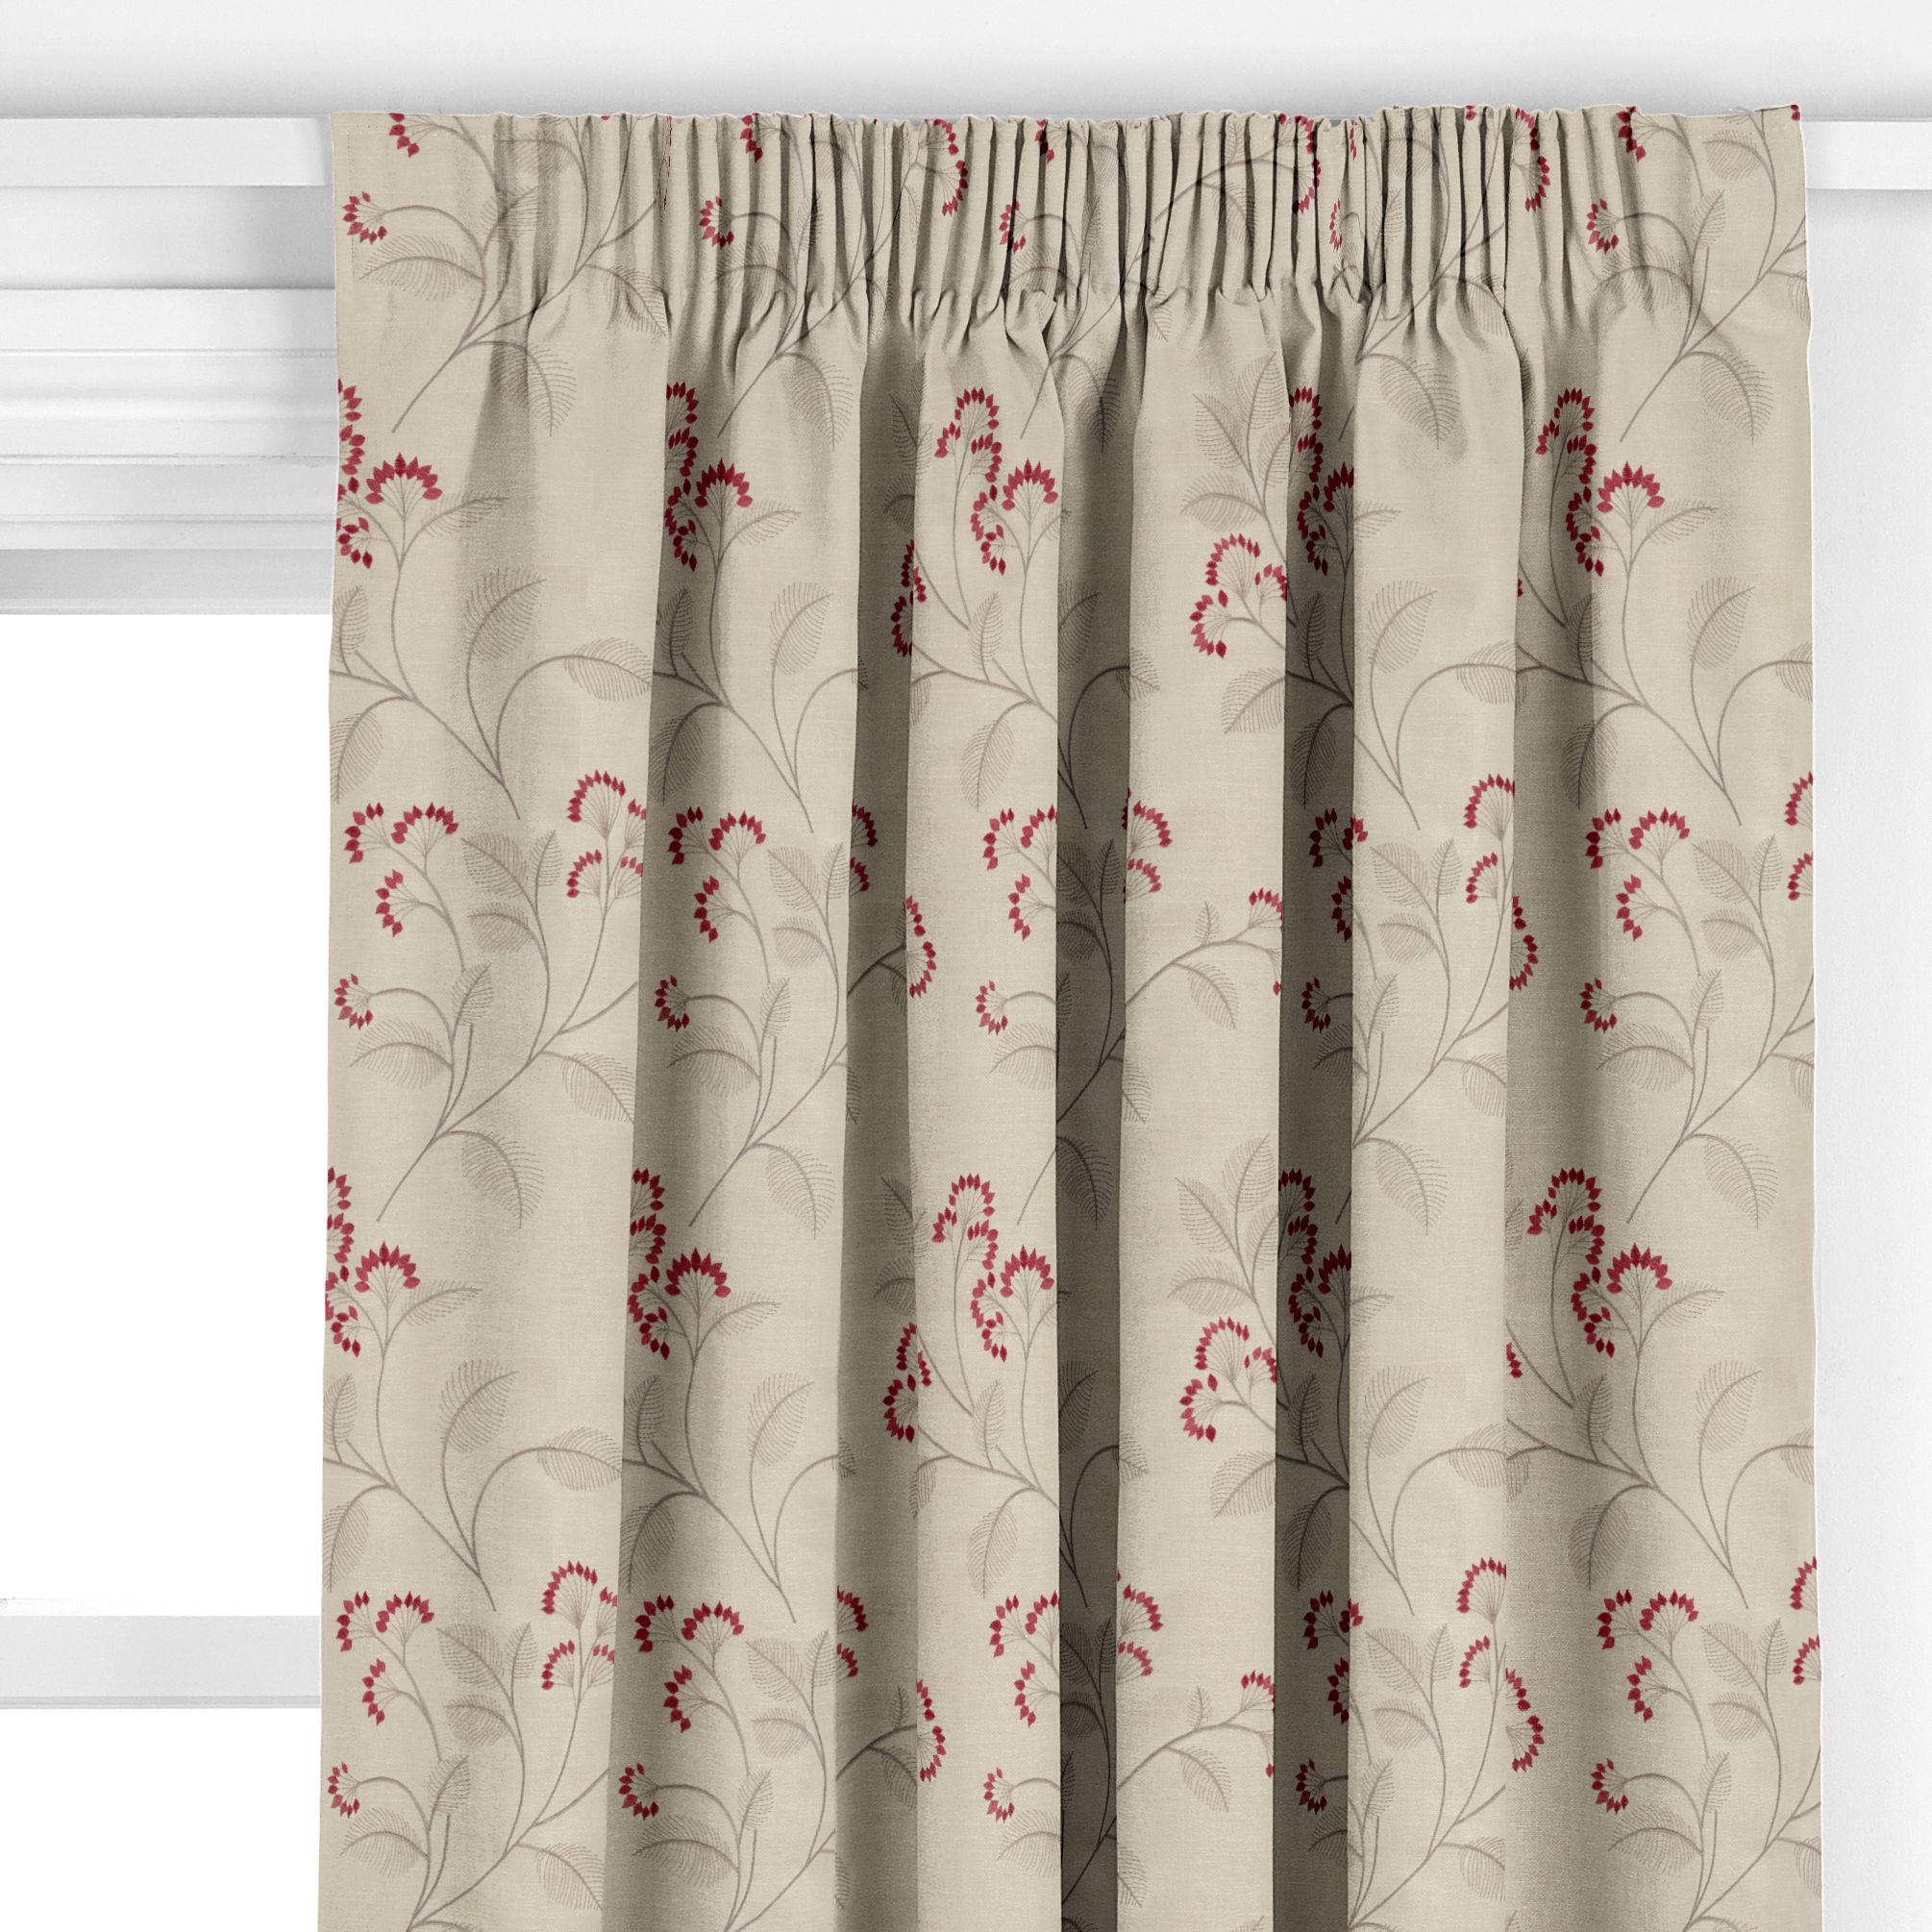 John Lewis & Partners Grace Floral Made to Measure Curtains, Rose at